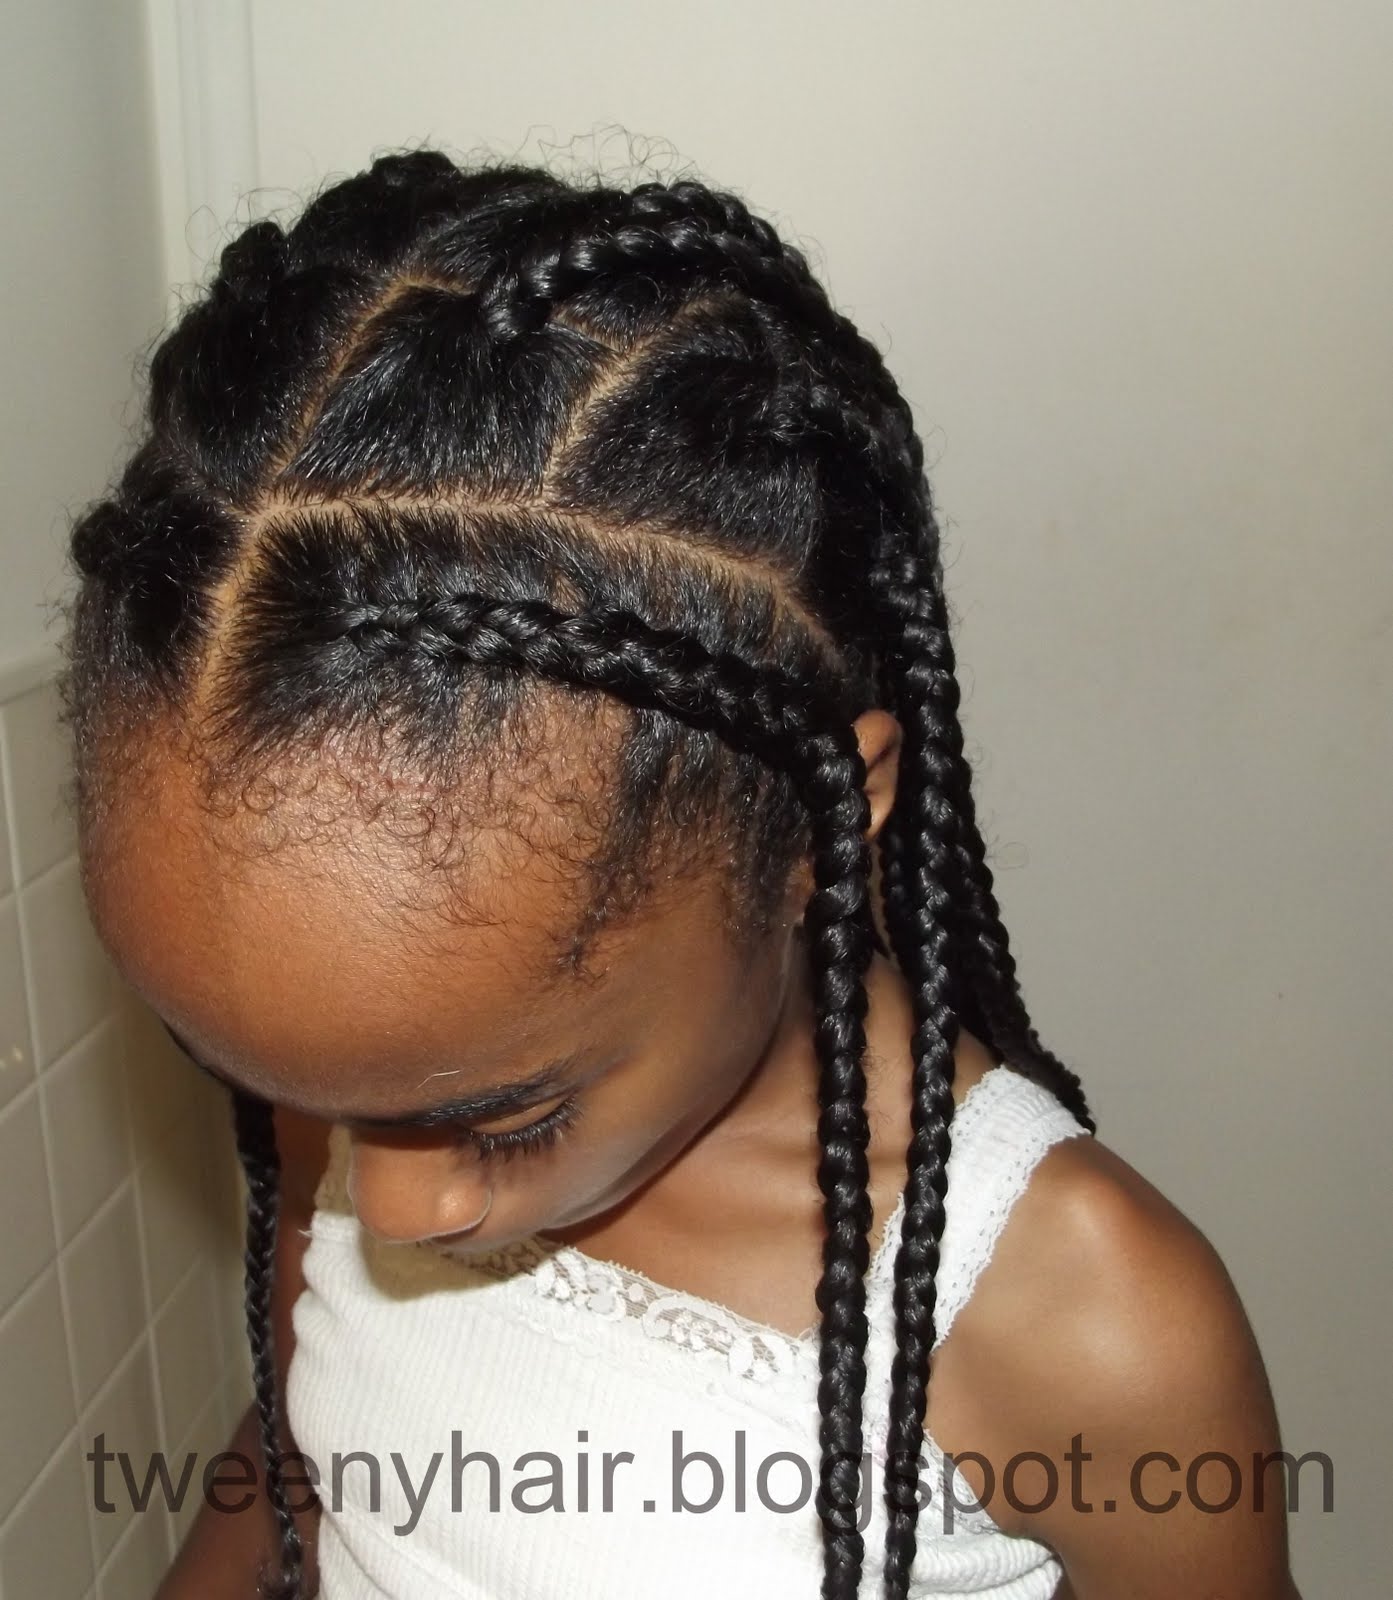 Micro African Braids Hairstyles African Braids Pictures Simple Style - Cornrows and Box Braids